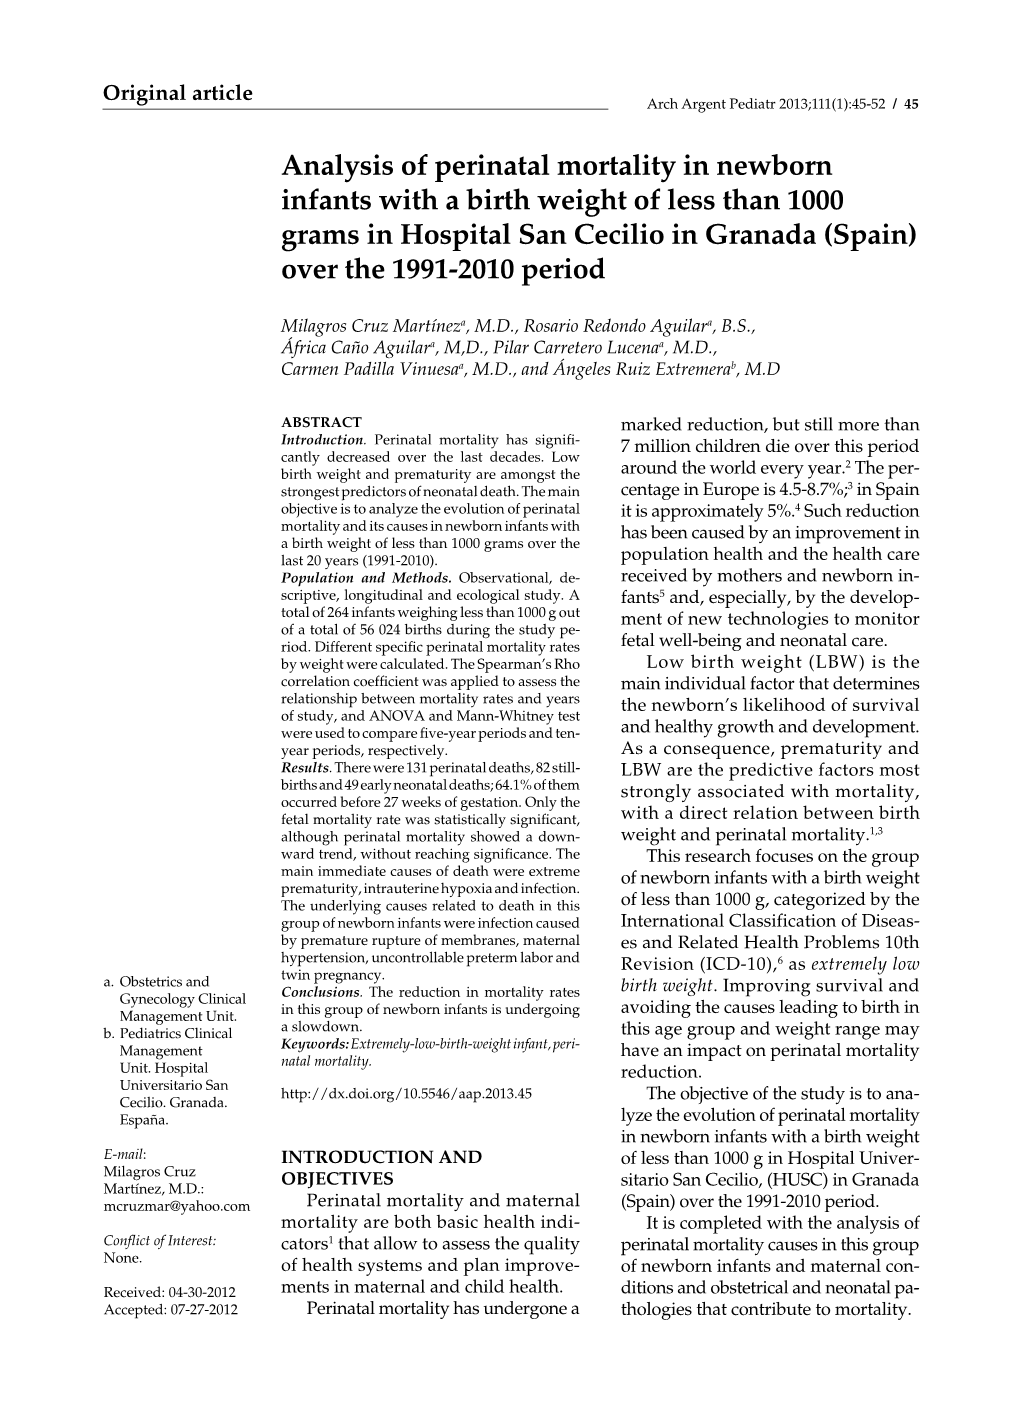 Analysis of Perinatal Mortality in Newborn Infants with a Birth Weight of Less Than 1000 Grams in Hospital San Cecilio in Granada (Spain) Over the 1991-2010 Period